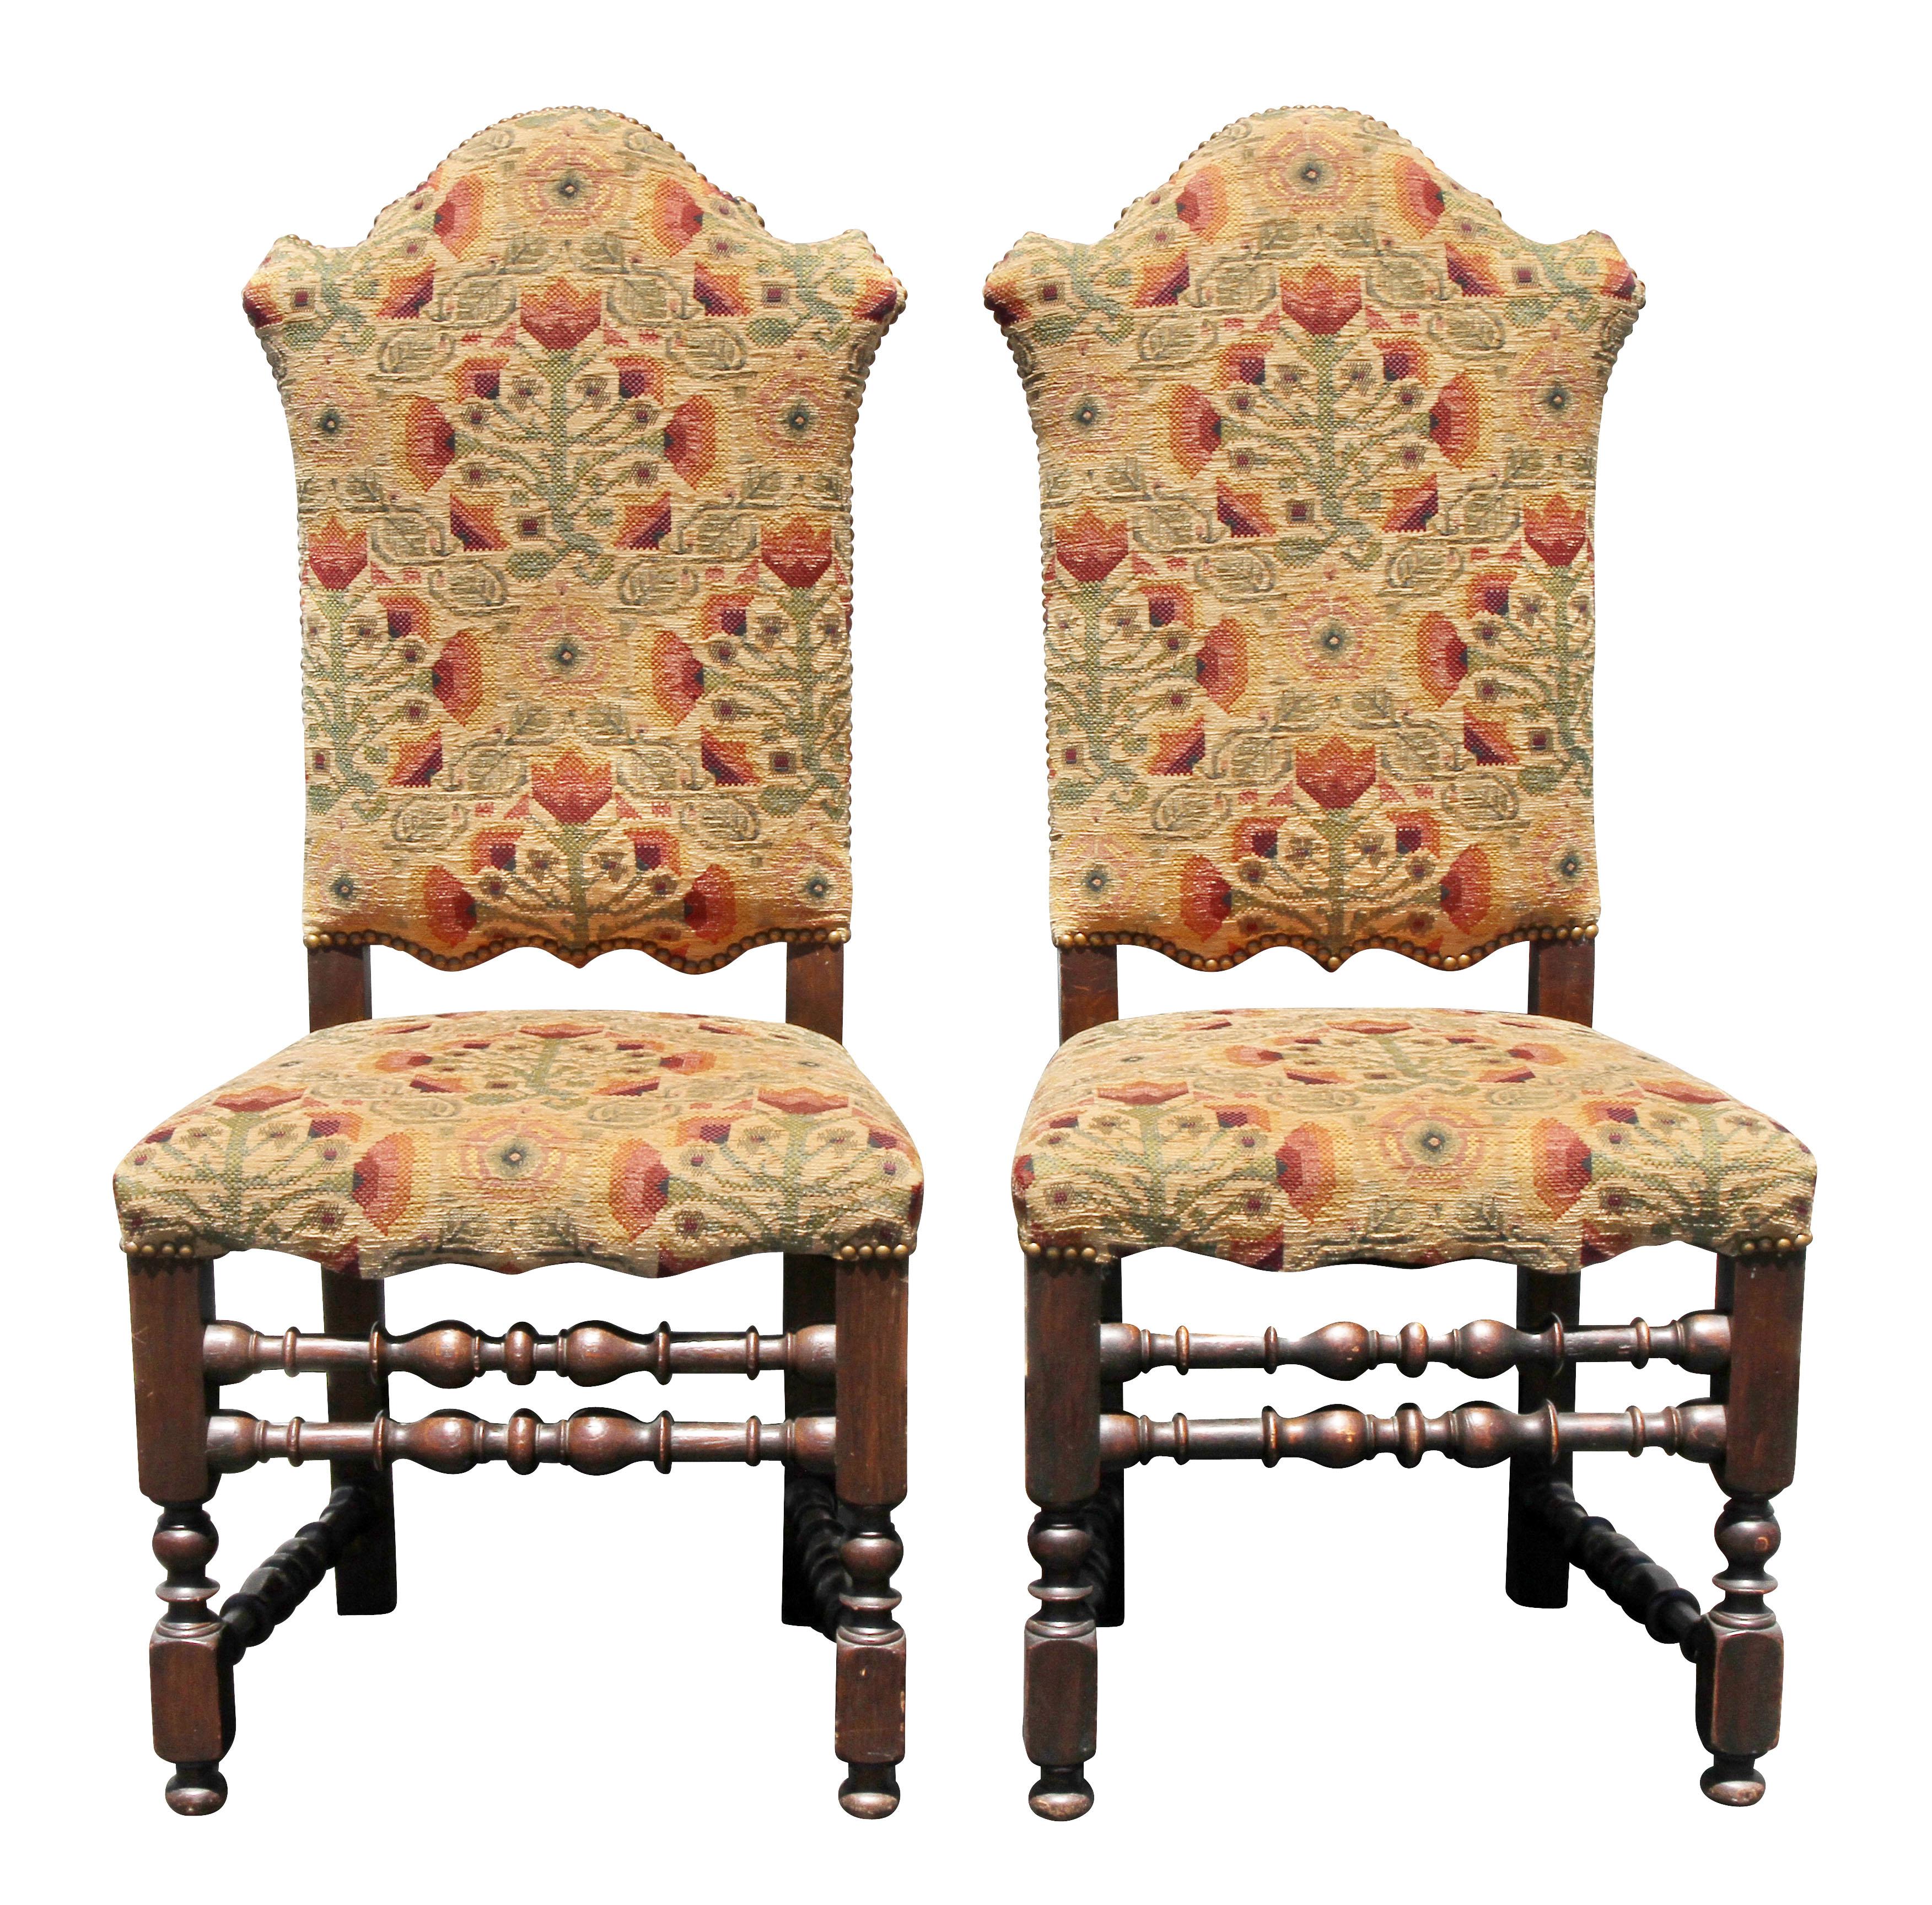 Each with arched tall backs and seats raised on turned legs with turned stretchers.